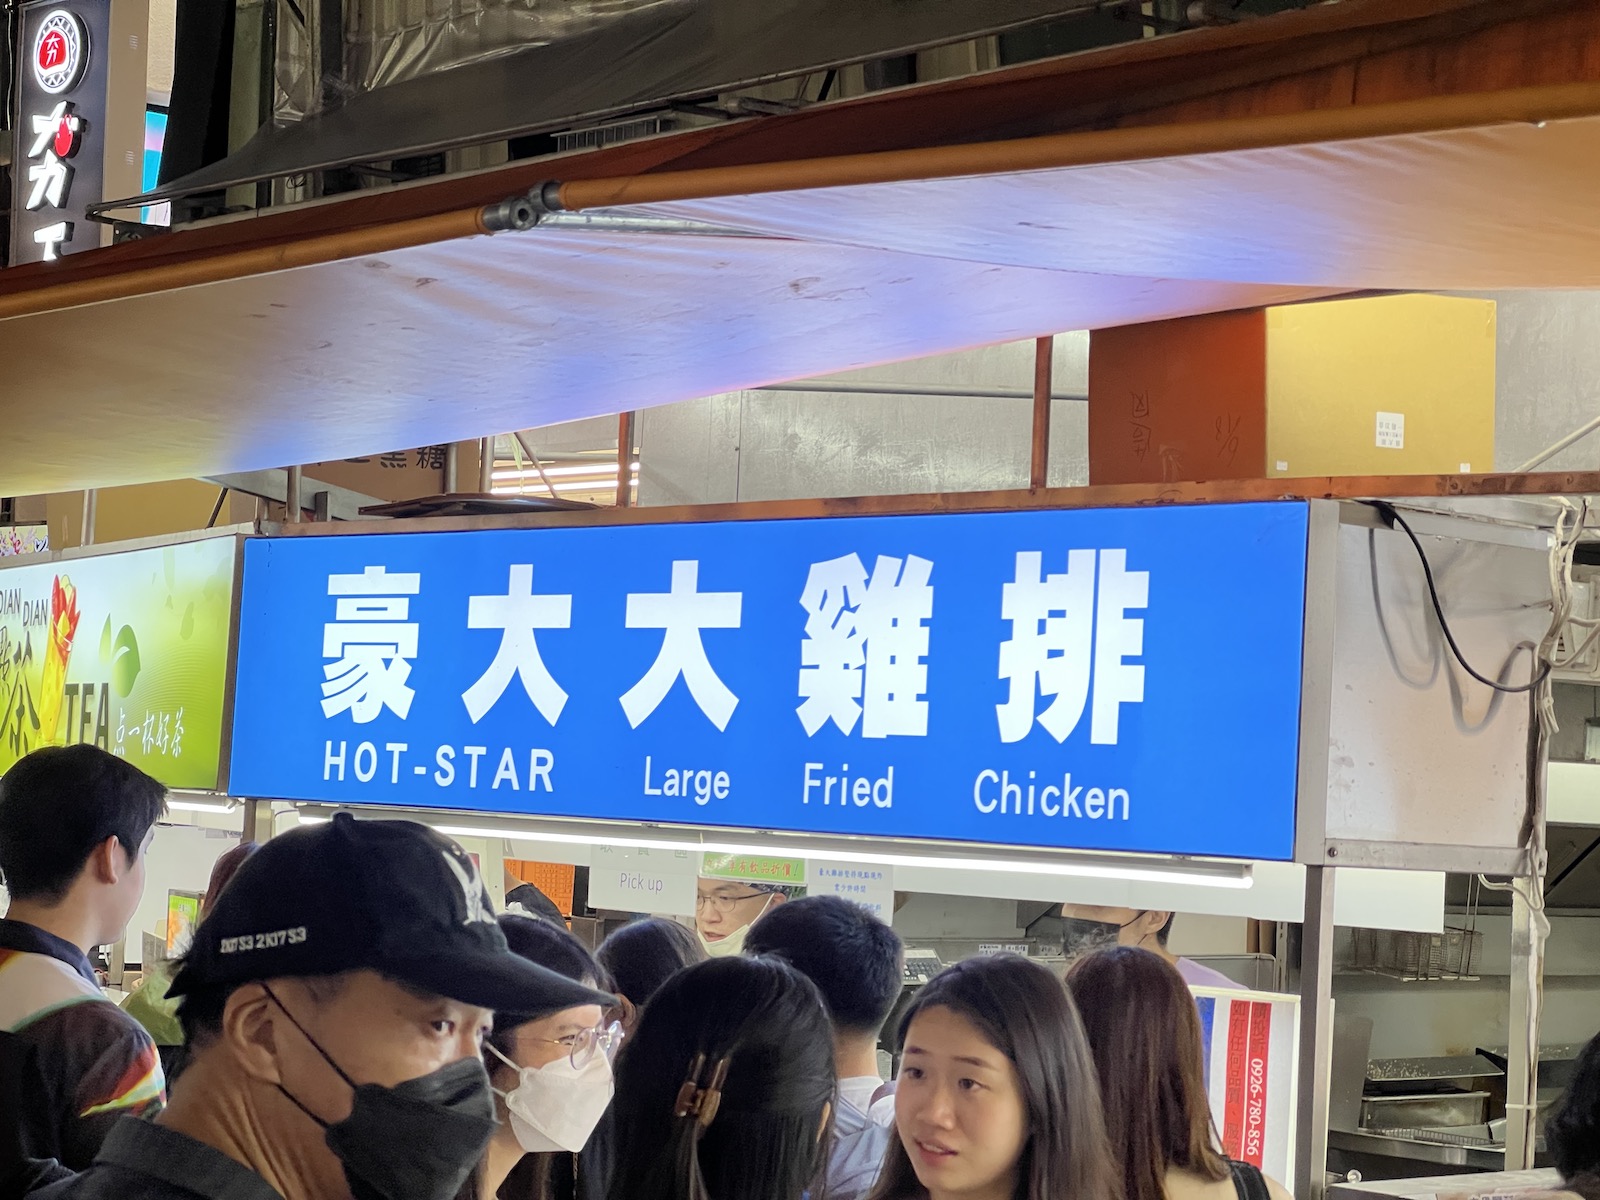 Hot Star is super famous Taiwanese fried chicken cutlets. Shilin Market is where it originated.